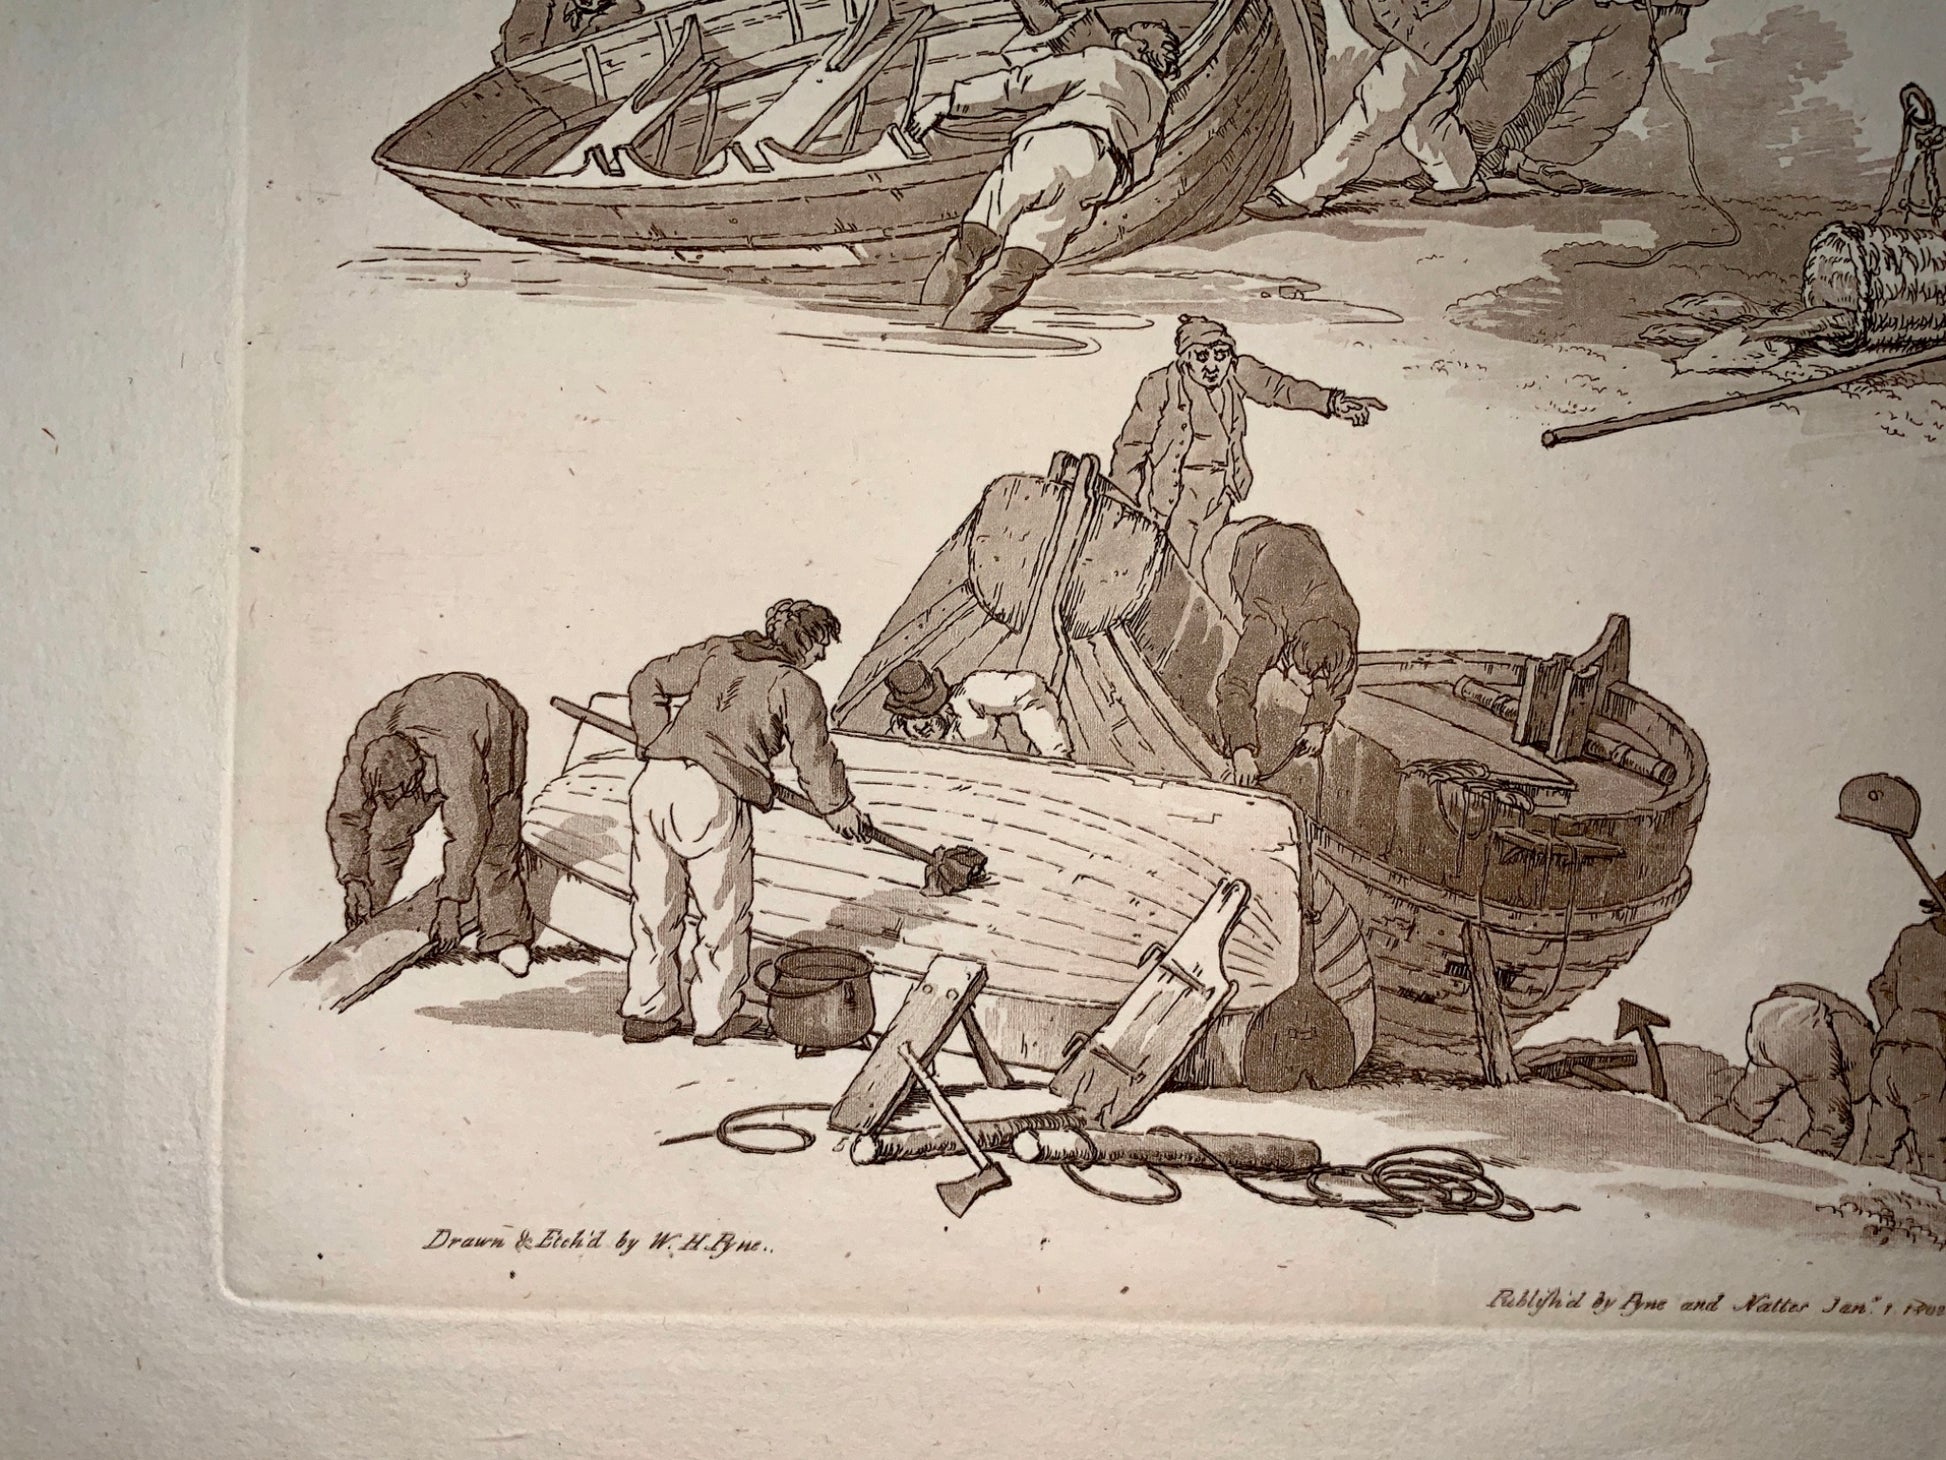 Sea Fishing - Sport - Aquatint by William Henry Pyne published in 1802